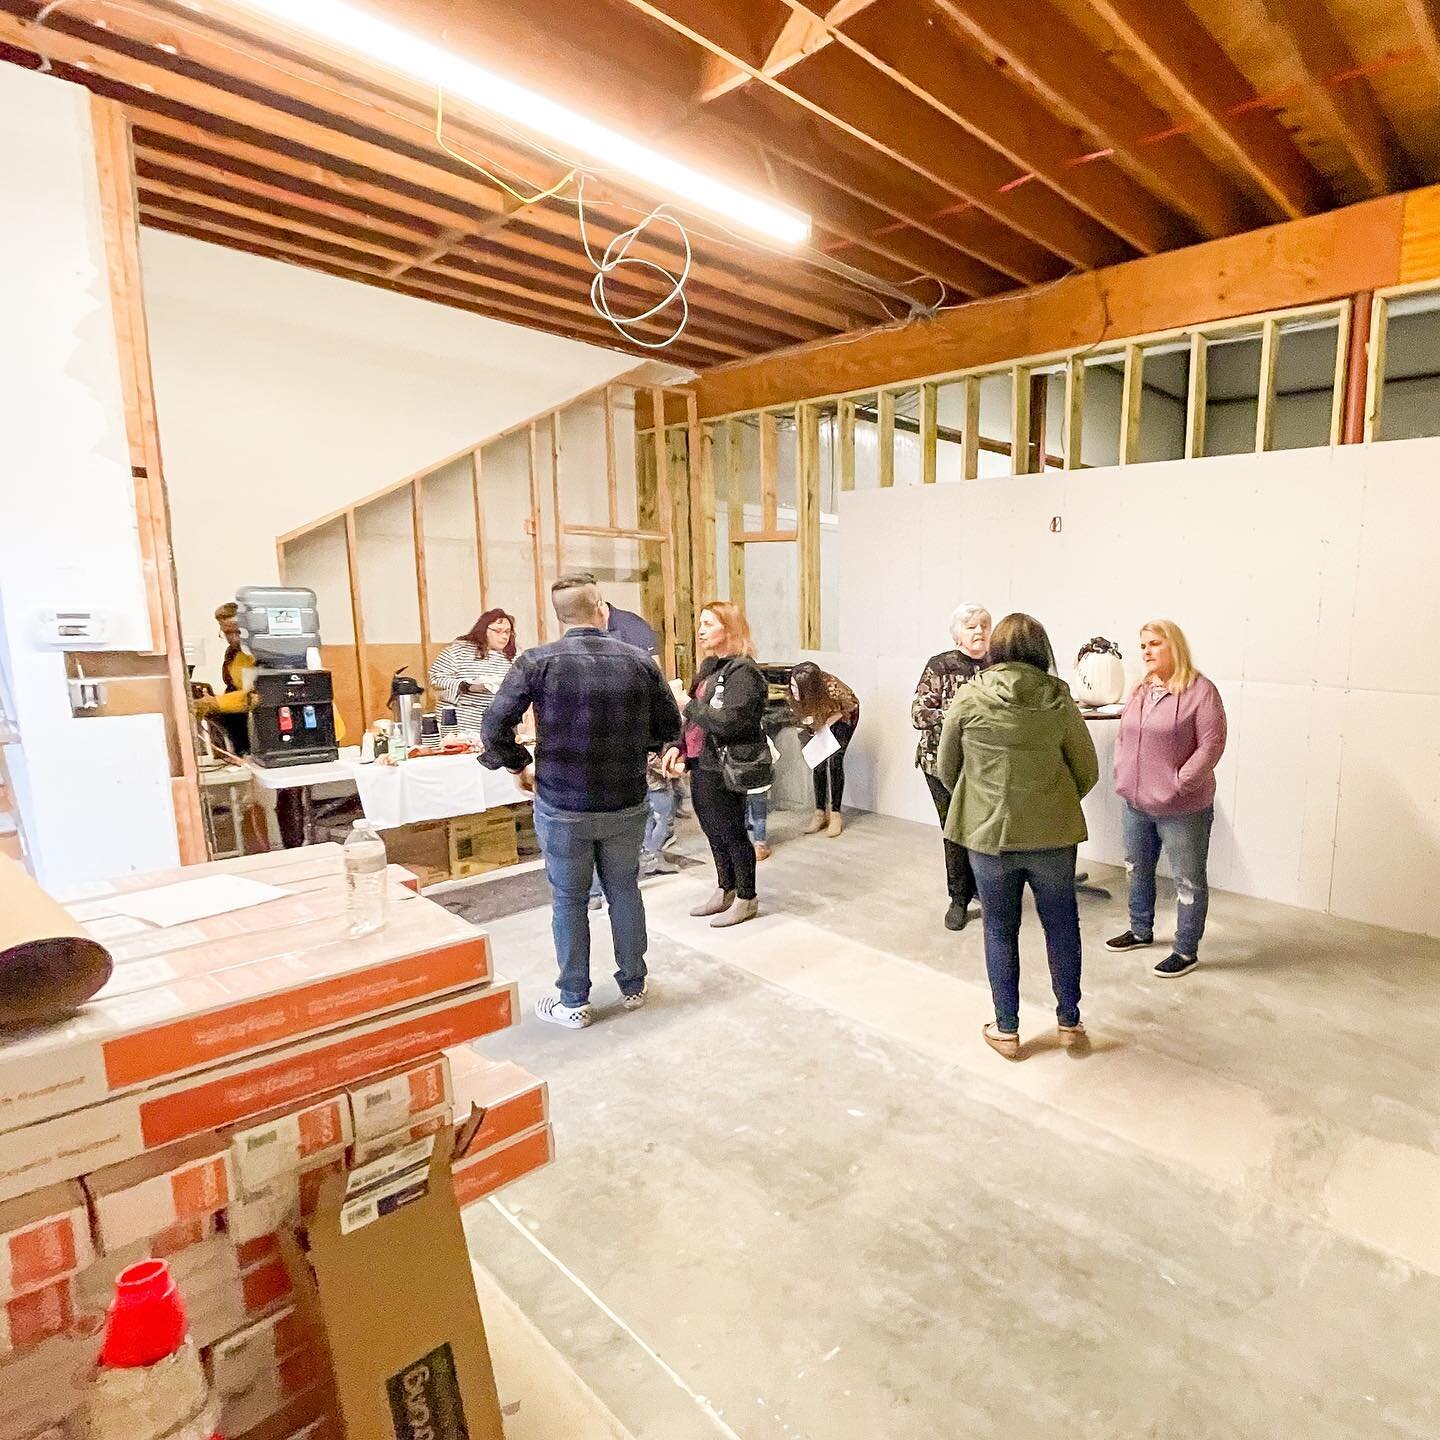 Progress update: we have some more walls and new rooms! God has provided for every step in this new building, and we truly appreciate every ounce of support you&rsquo;ve given&hellip; Next week: Floors! #motionchurch #waterbury #waterburyct #church #